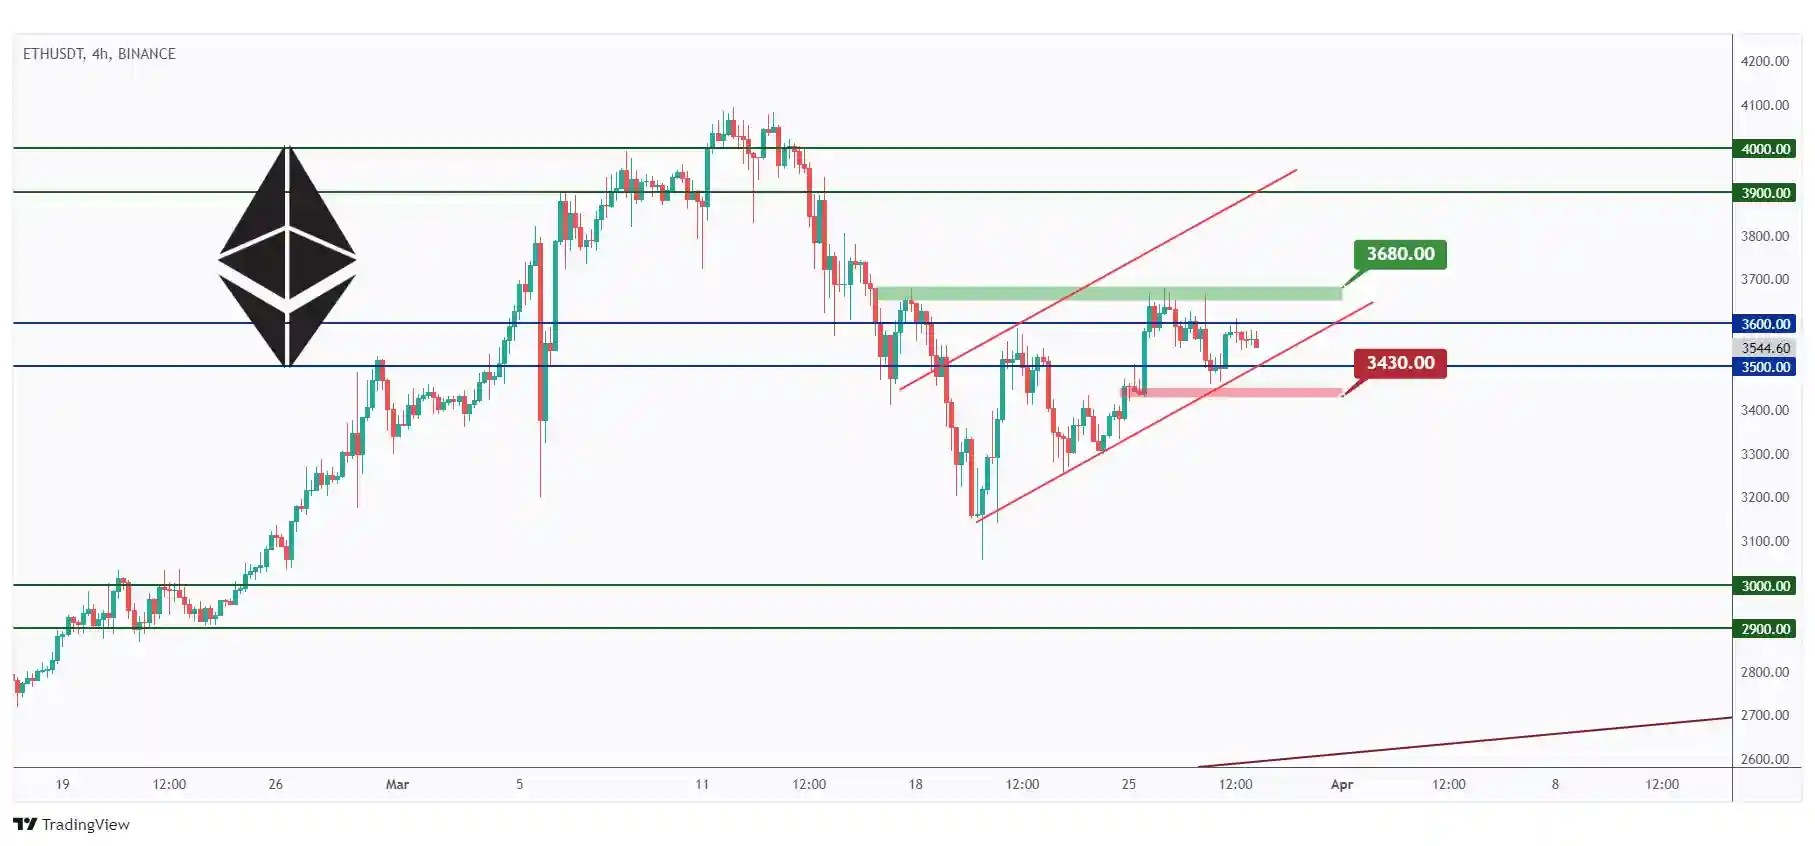 ETH 4h chart overall bullish trading within a rising channel and currently hovering between $3430 and $3680.